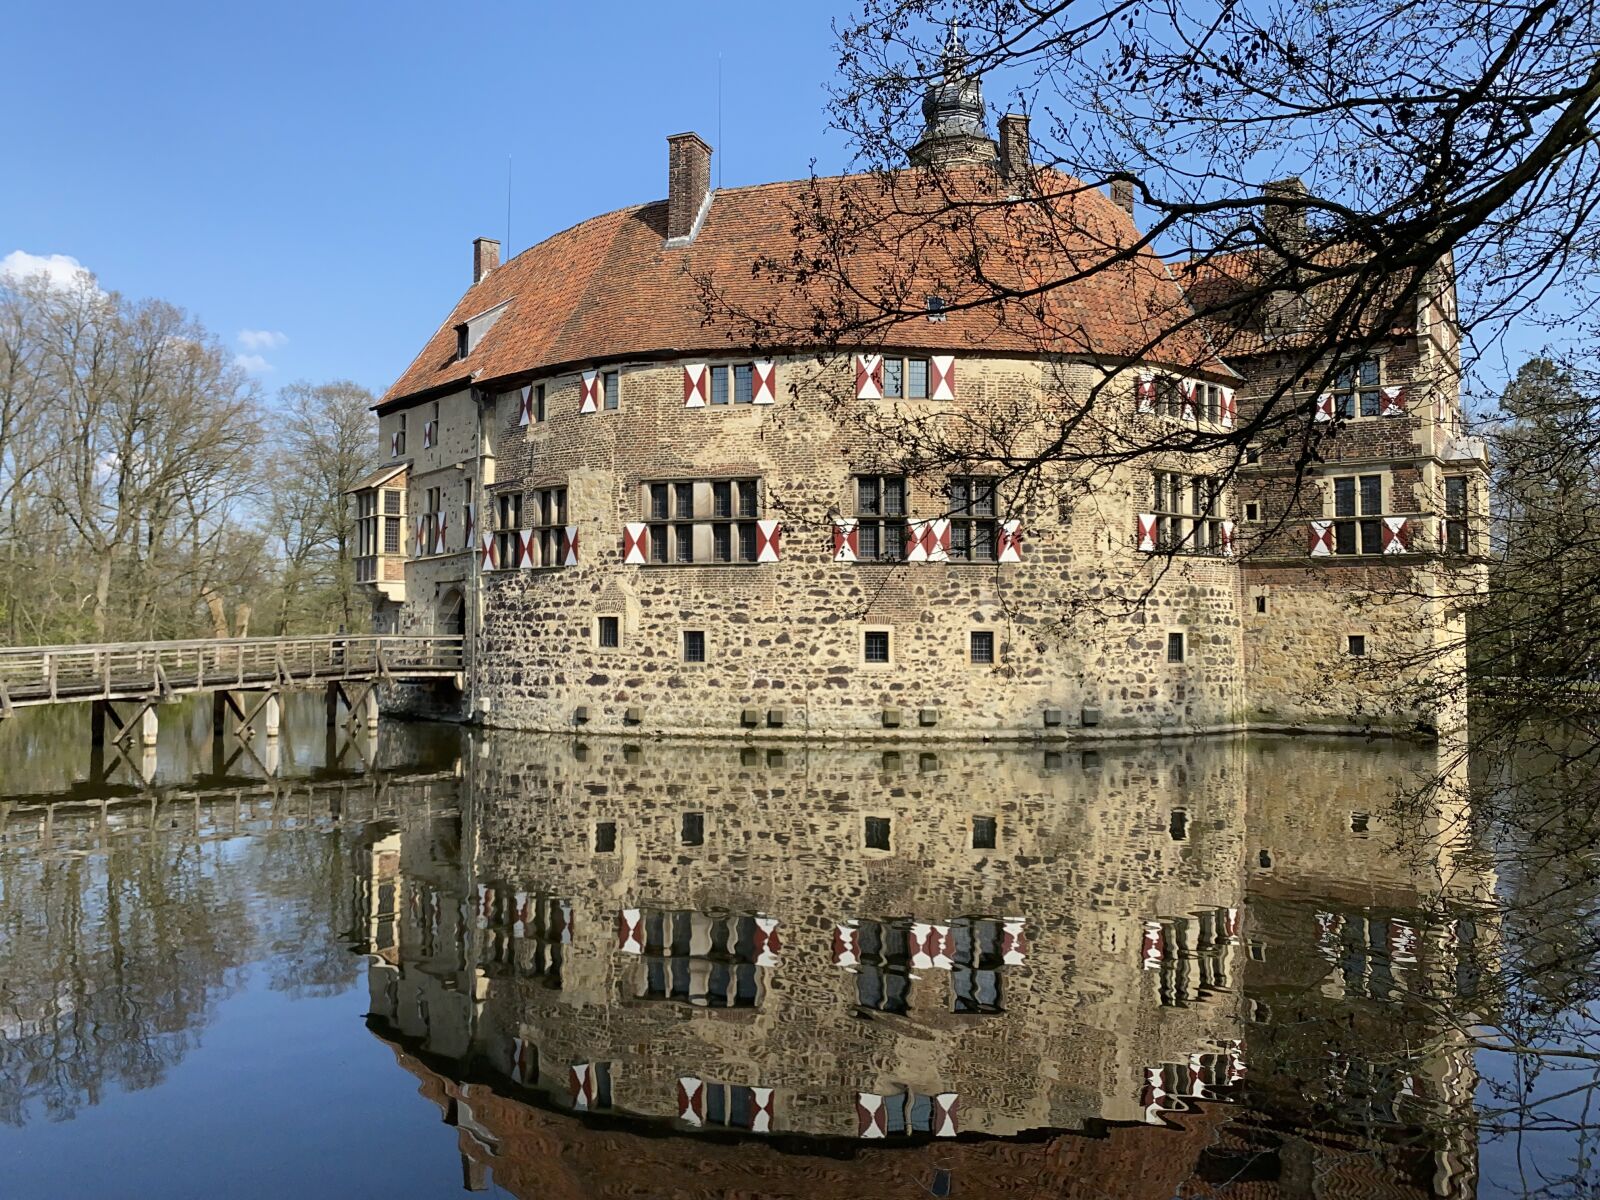 Apple iPhone 11 Pro + iPhone 11 Pro back camera 4.25mm f/1.8 sample photo. Castle, reflection, water photography